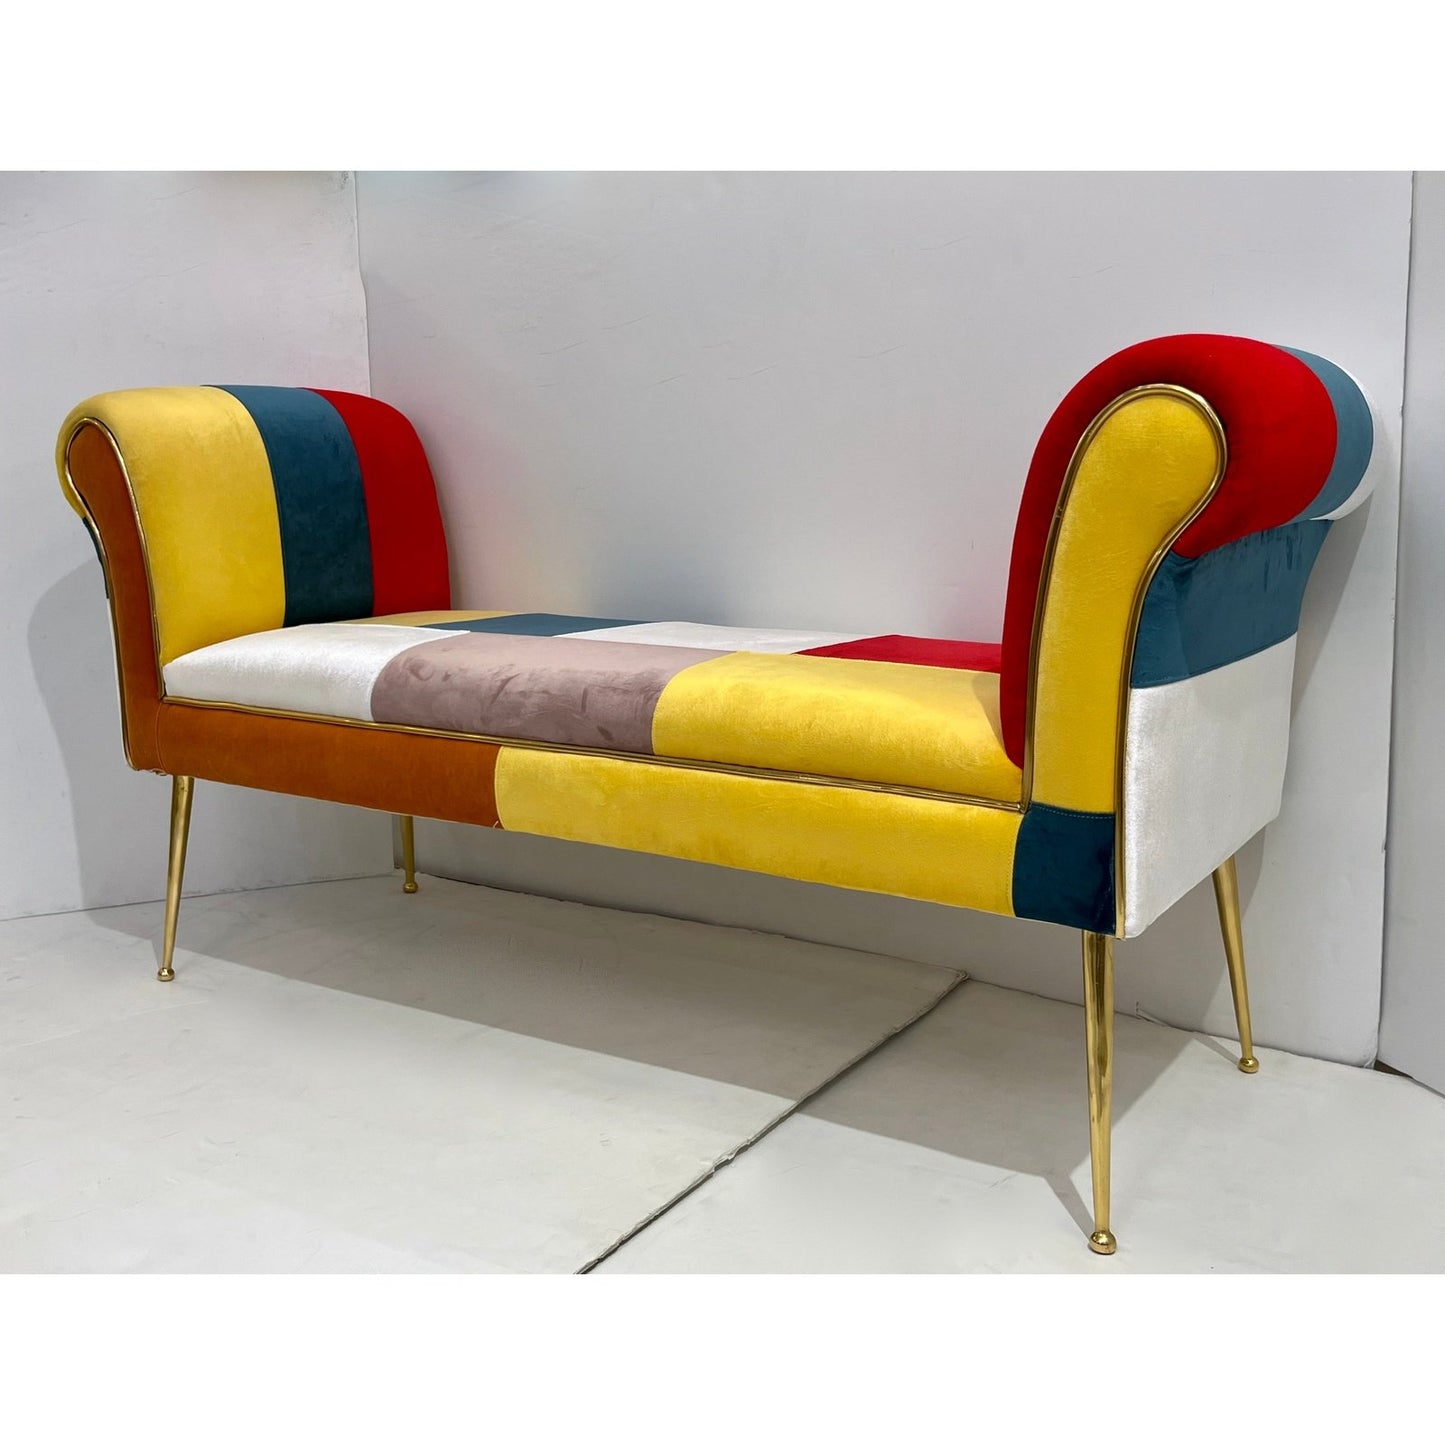 Contemporary Italian White Green Yellow Red Mondrian Upholstered Bench/Banquette